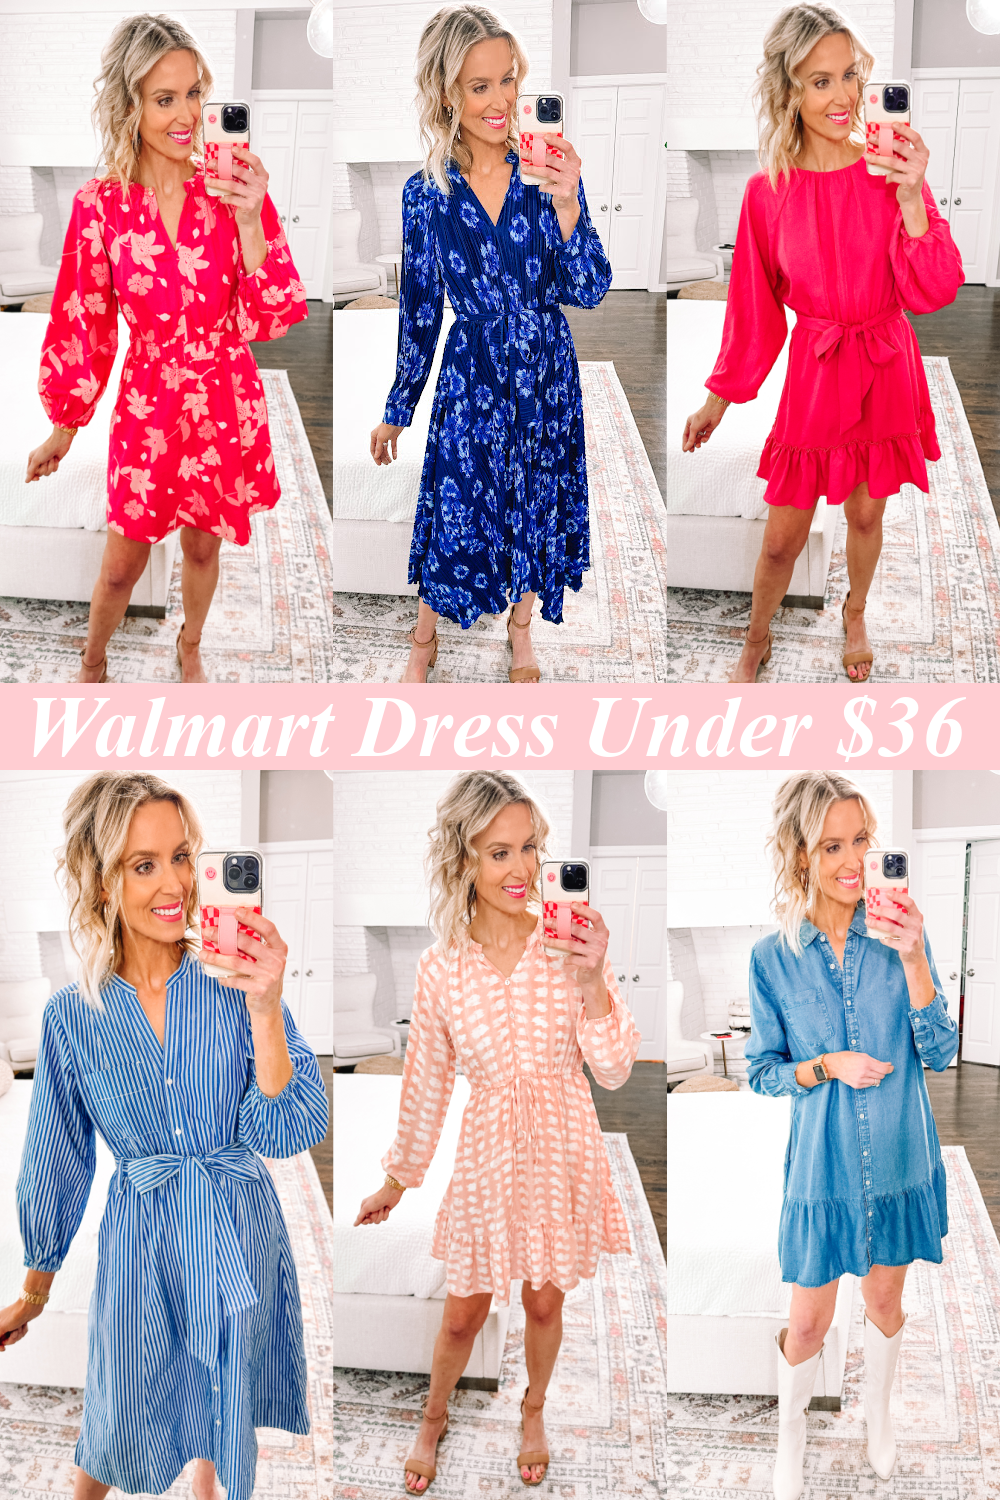 Walmart Spring Dress Try On Haul - Straight A Style